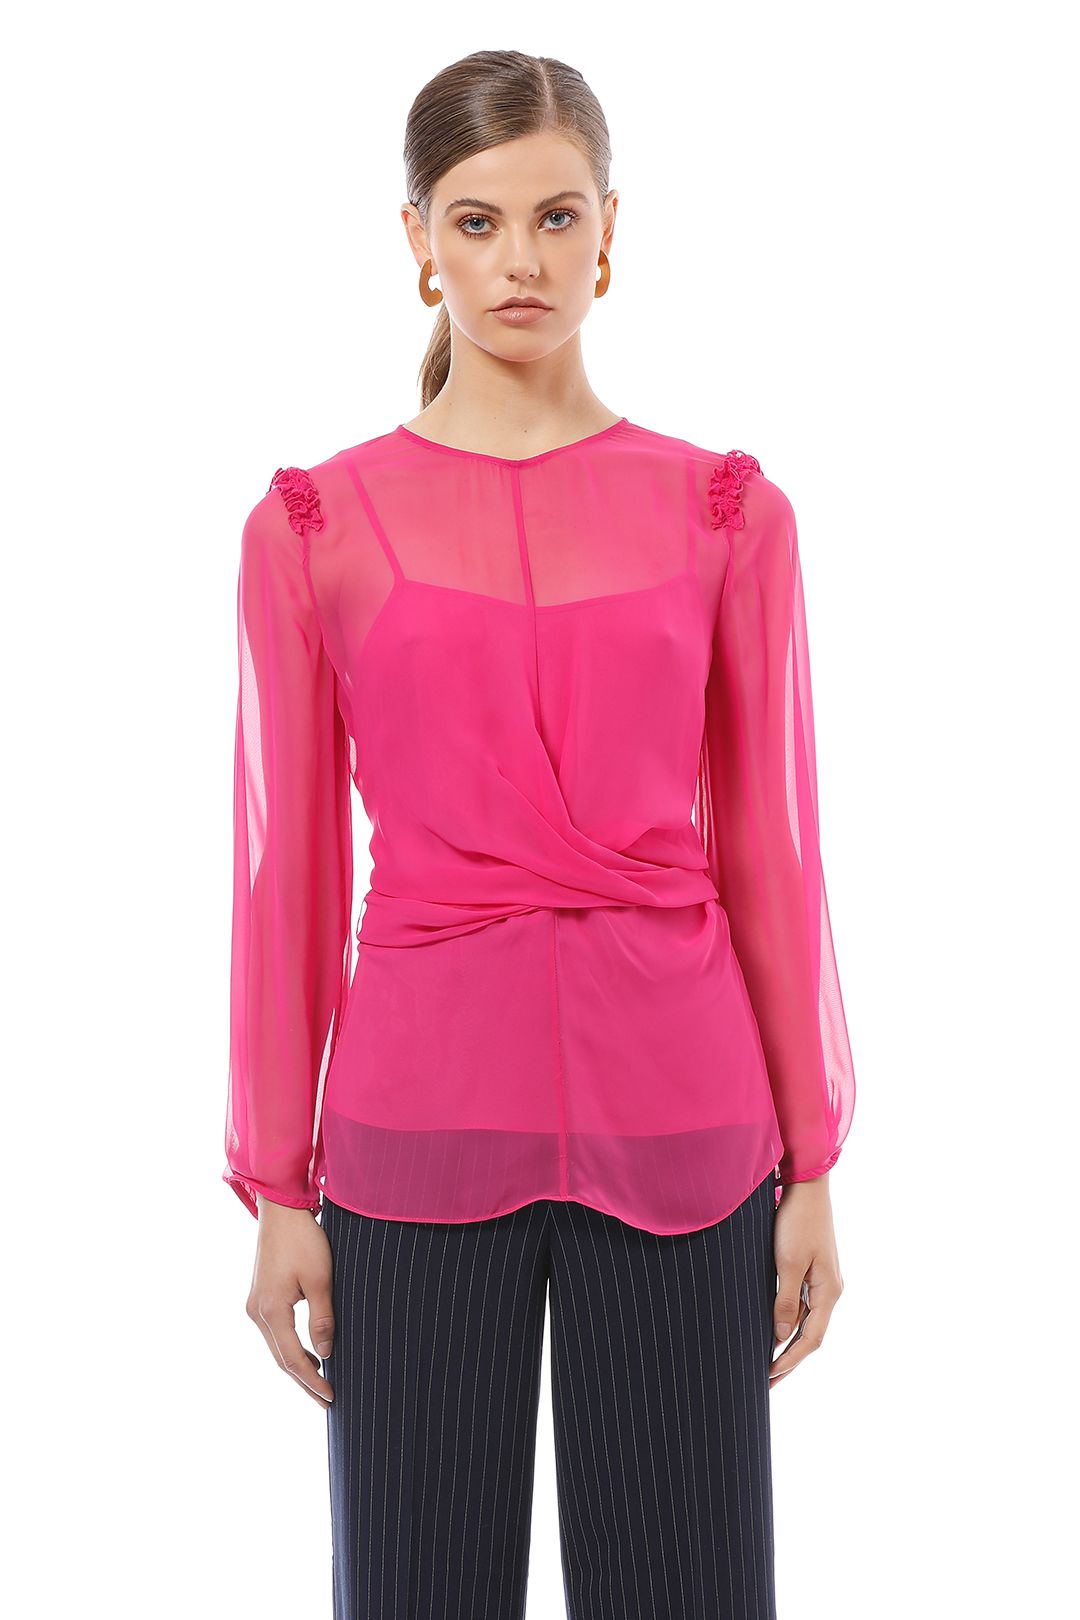 Dylan Twist Top by Camilla and Marc for Hire